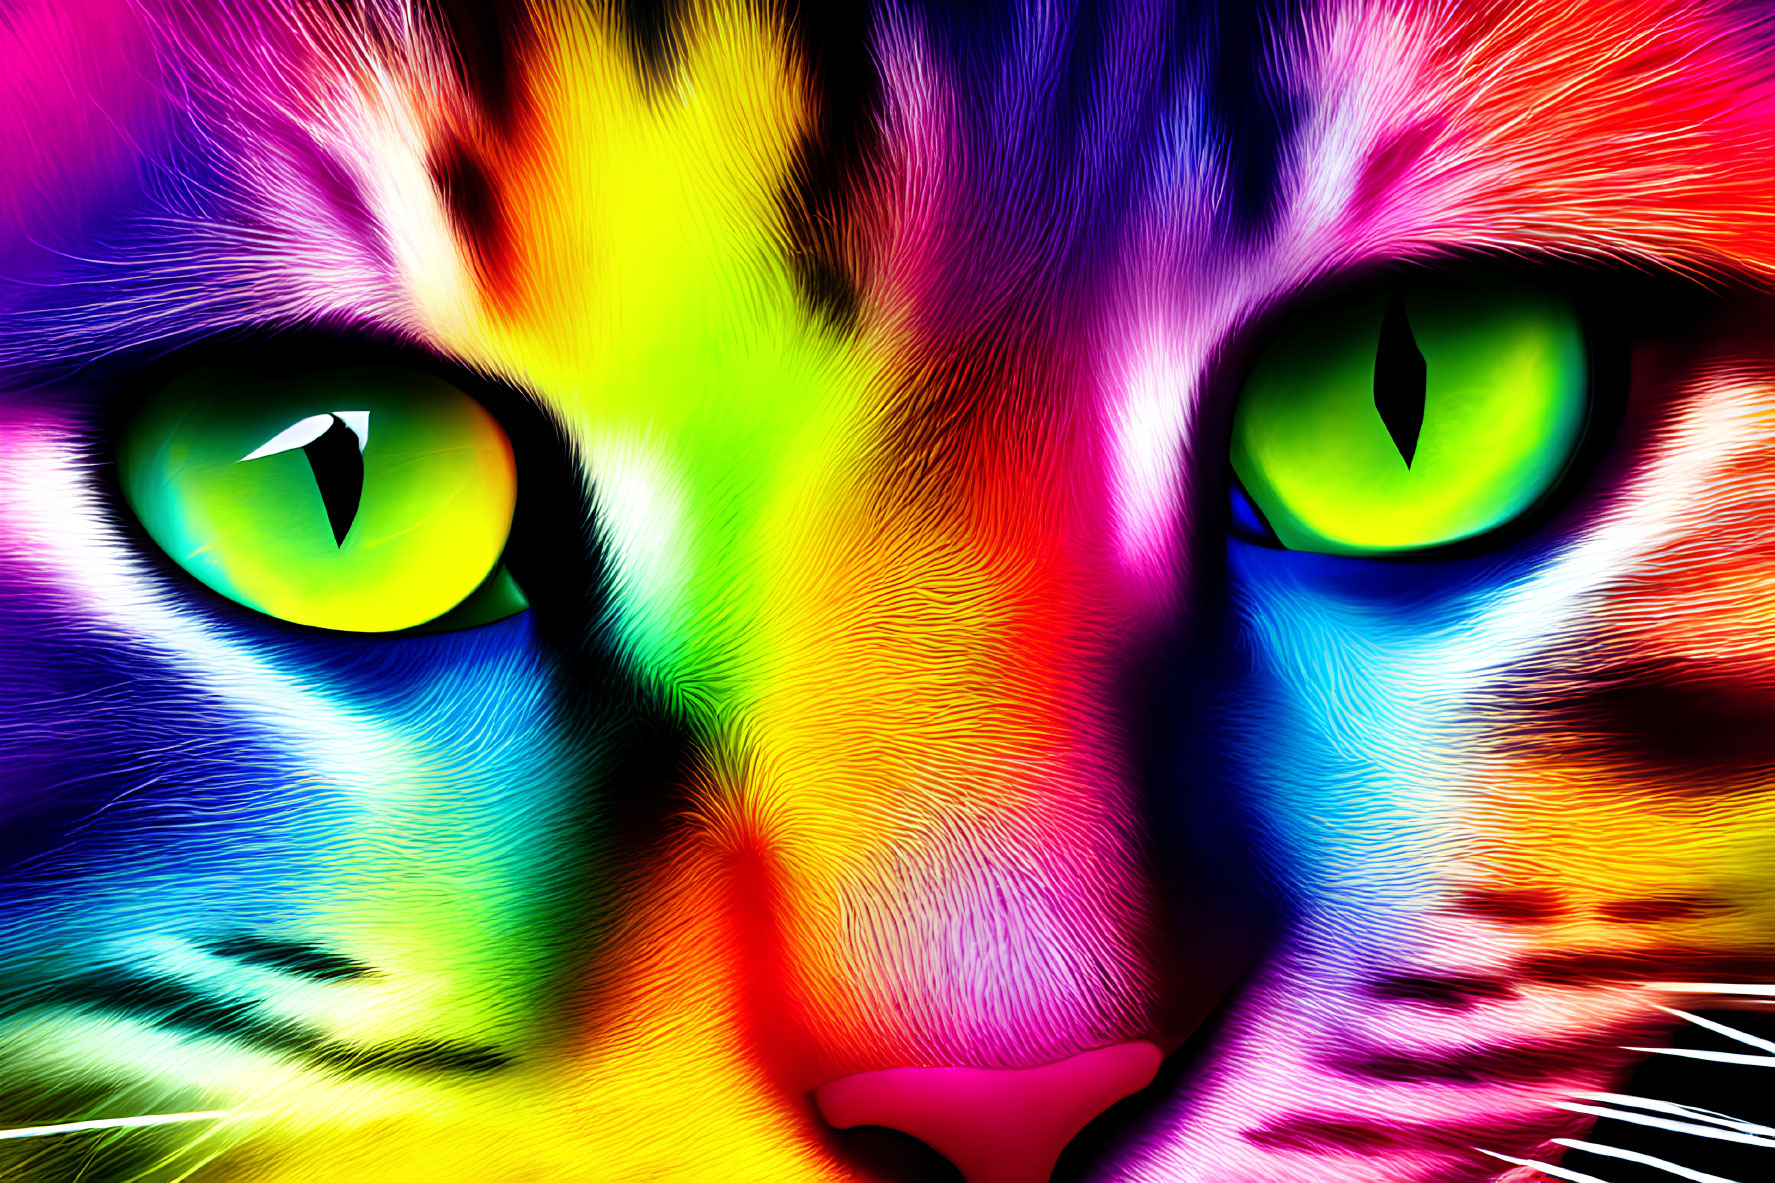 Colorful Digital Art: Cat's Face in Neon Hues & Green-Eyed Gaze